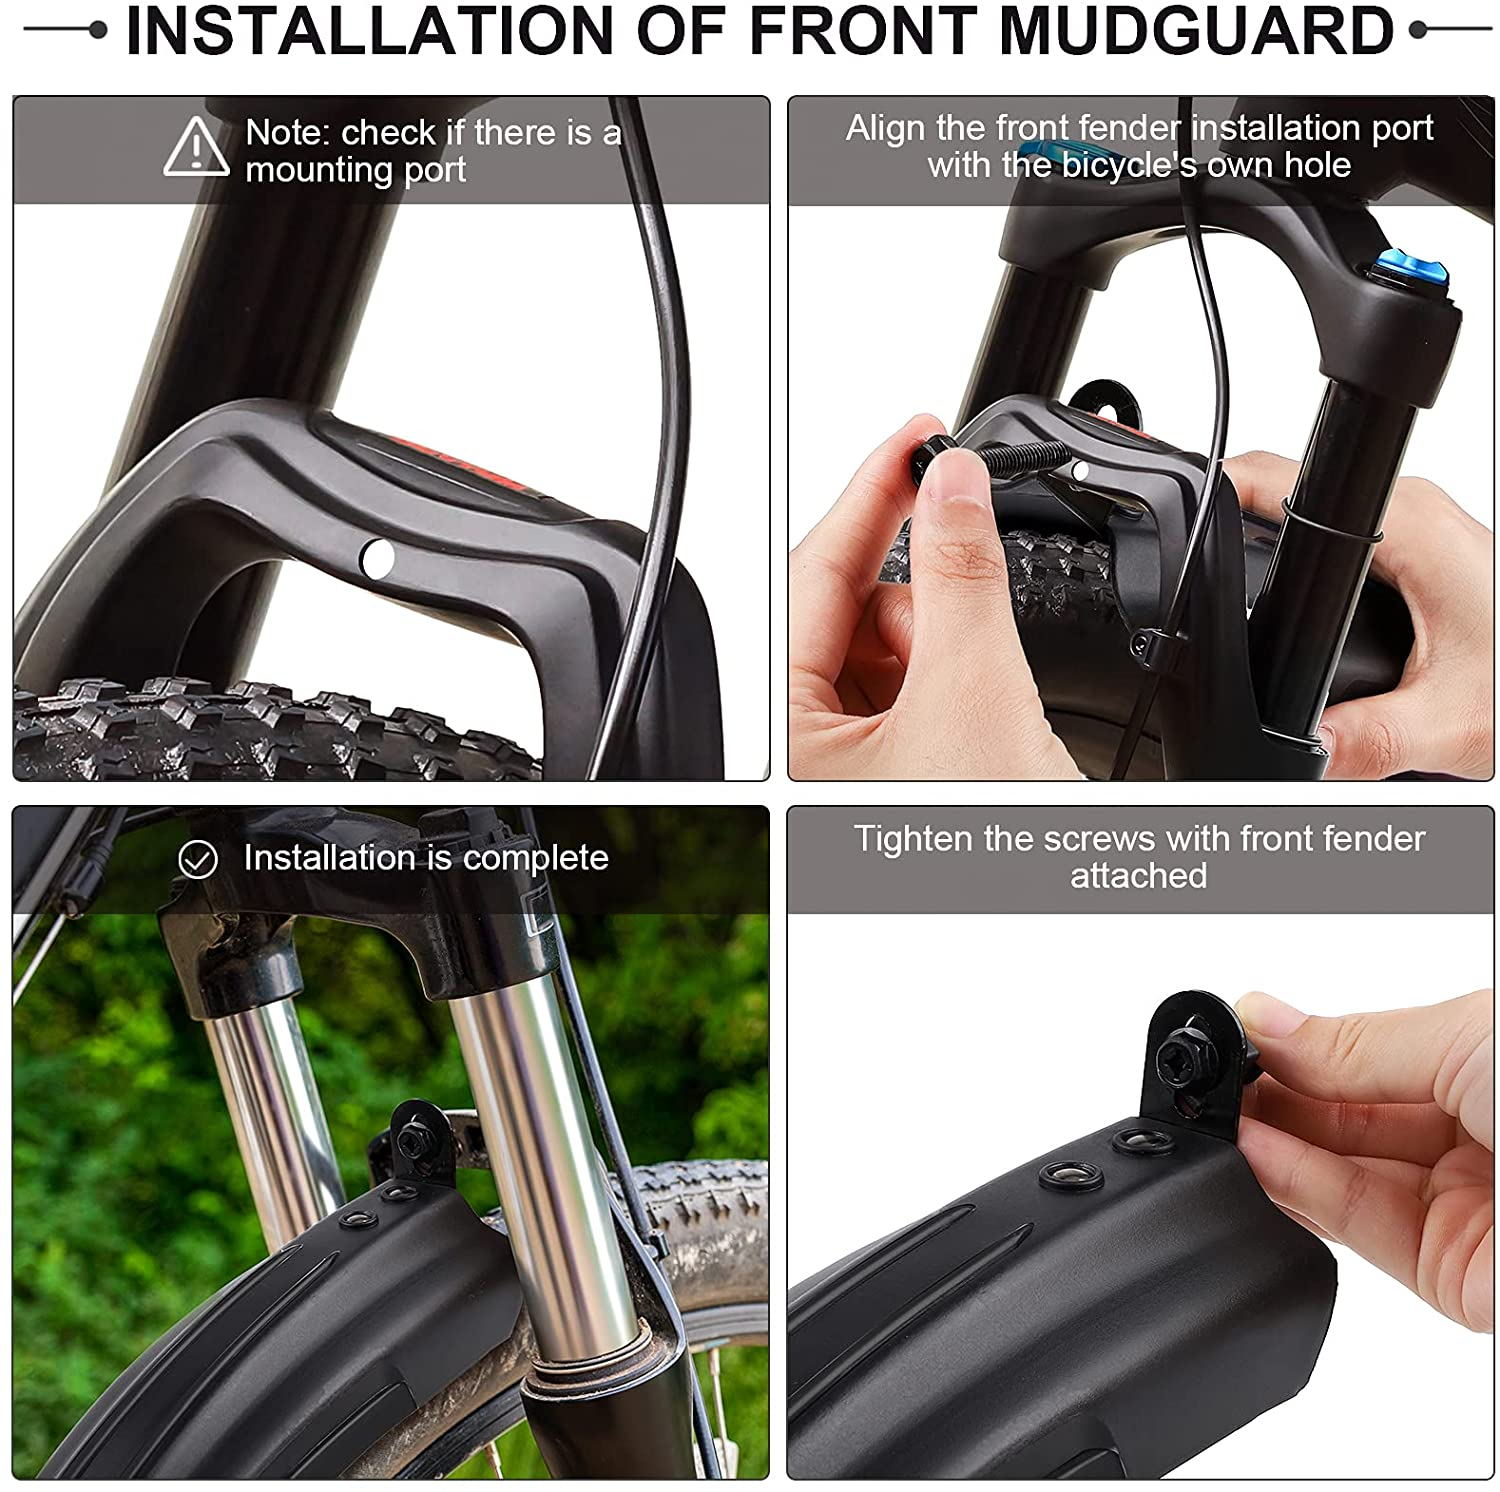 Clip-on mudguards are the easiest to install onto your mountain bike.